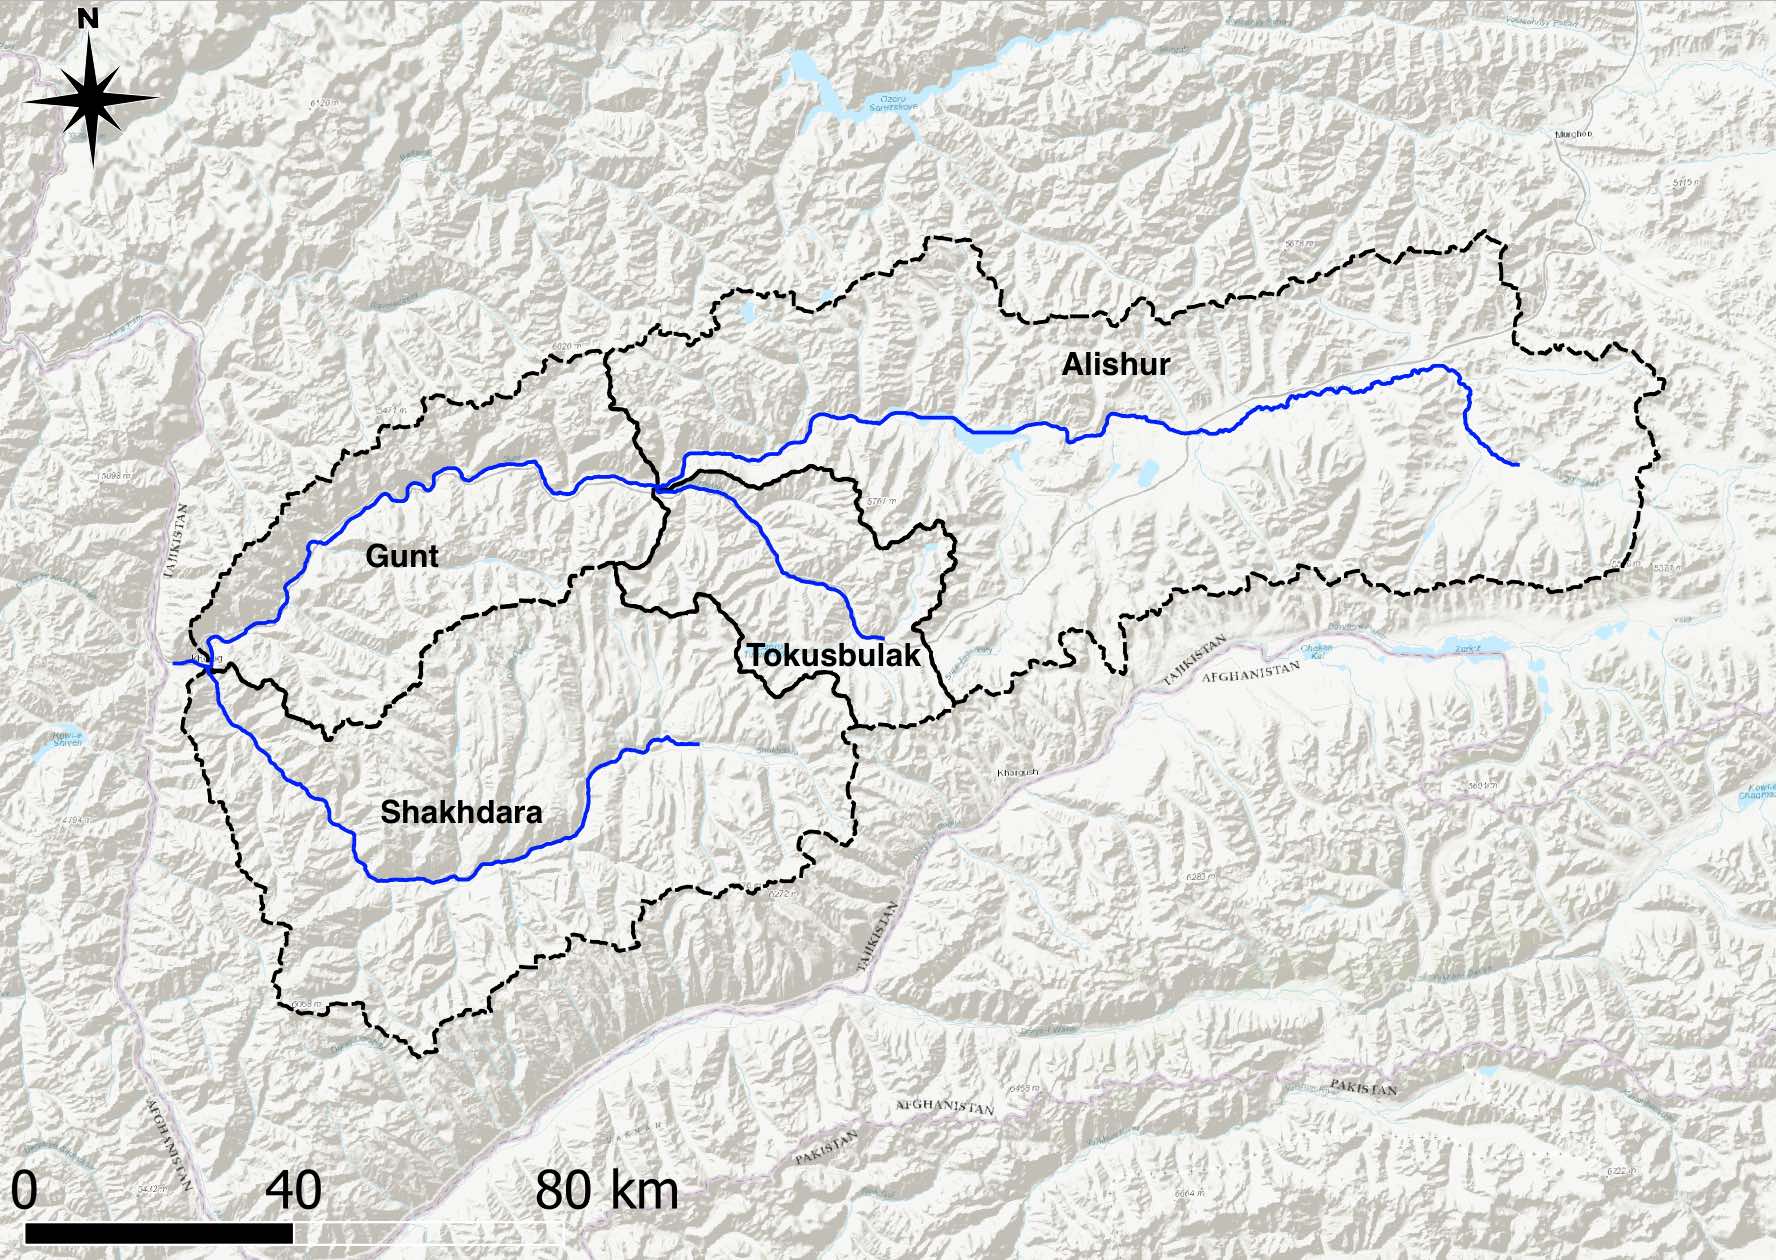 Gunt river catchment with the individual subbasins is shown. These subbasins are further divided into elevation band zones and the mean climate finally extracted over these subbasin-specfic elevation bands (see Figure 5.33).